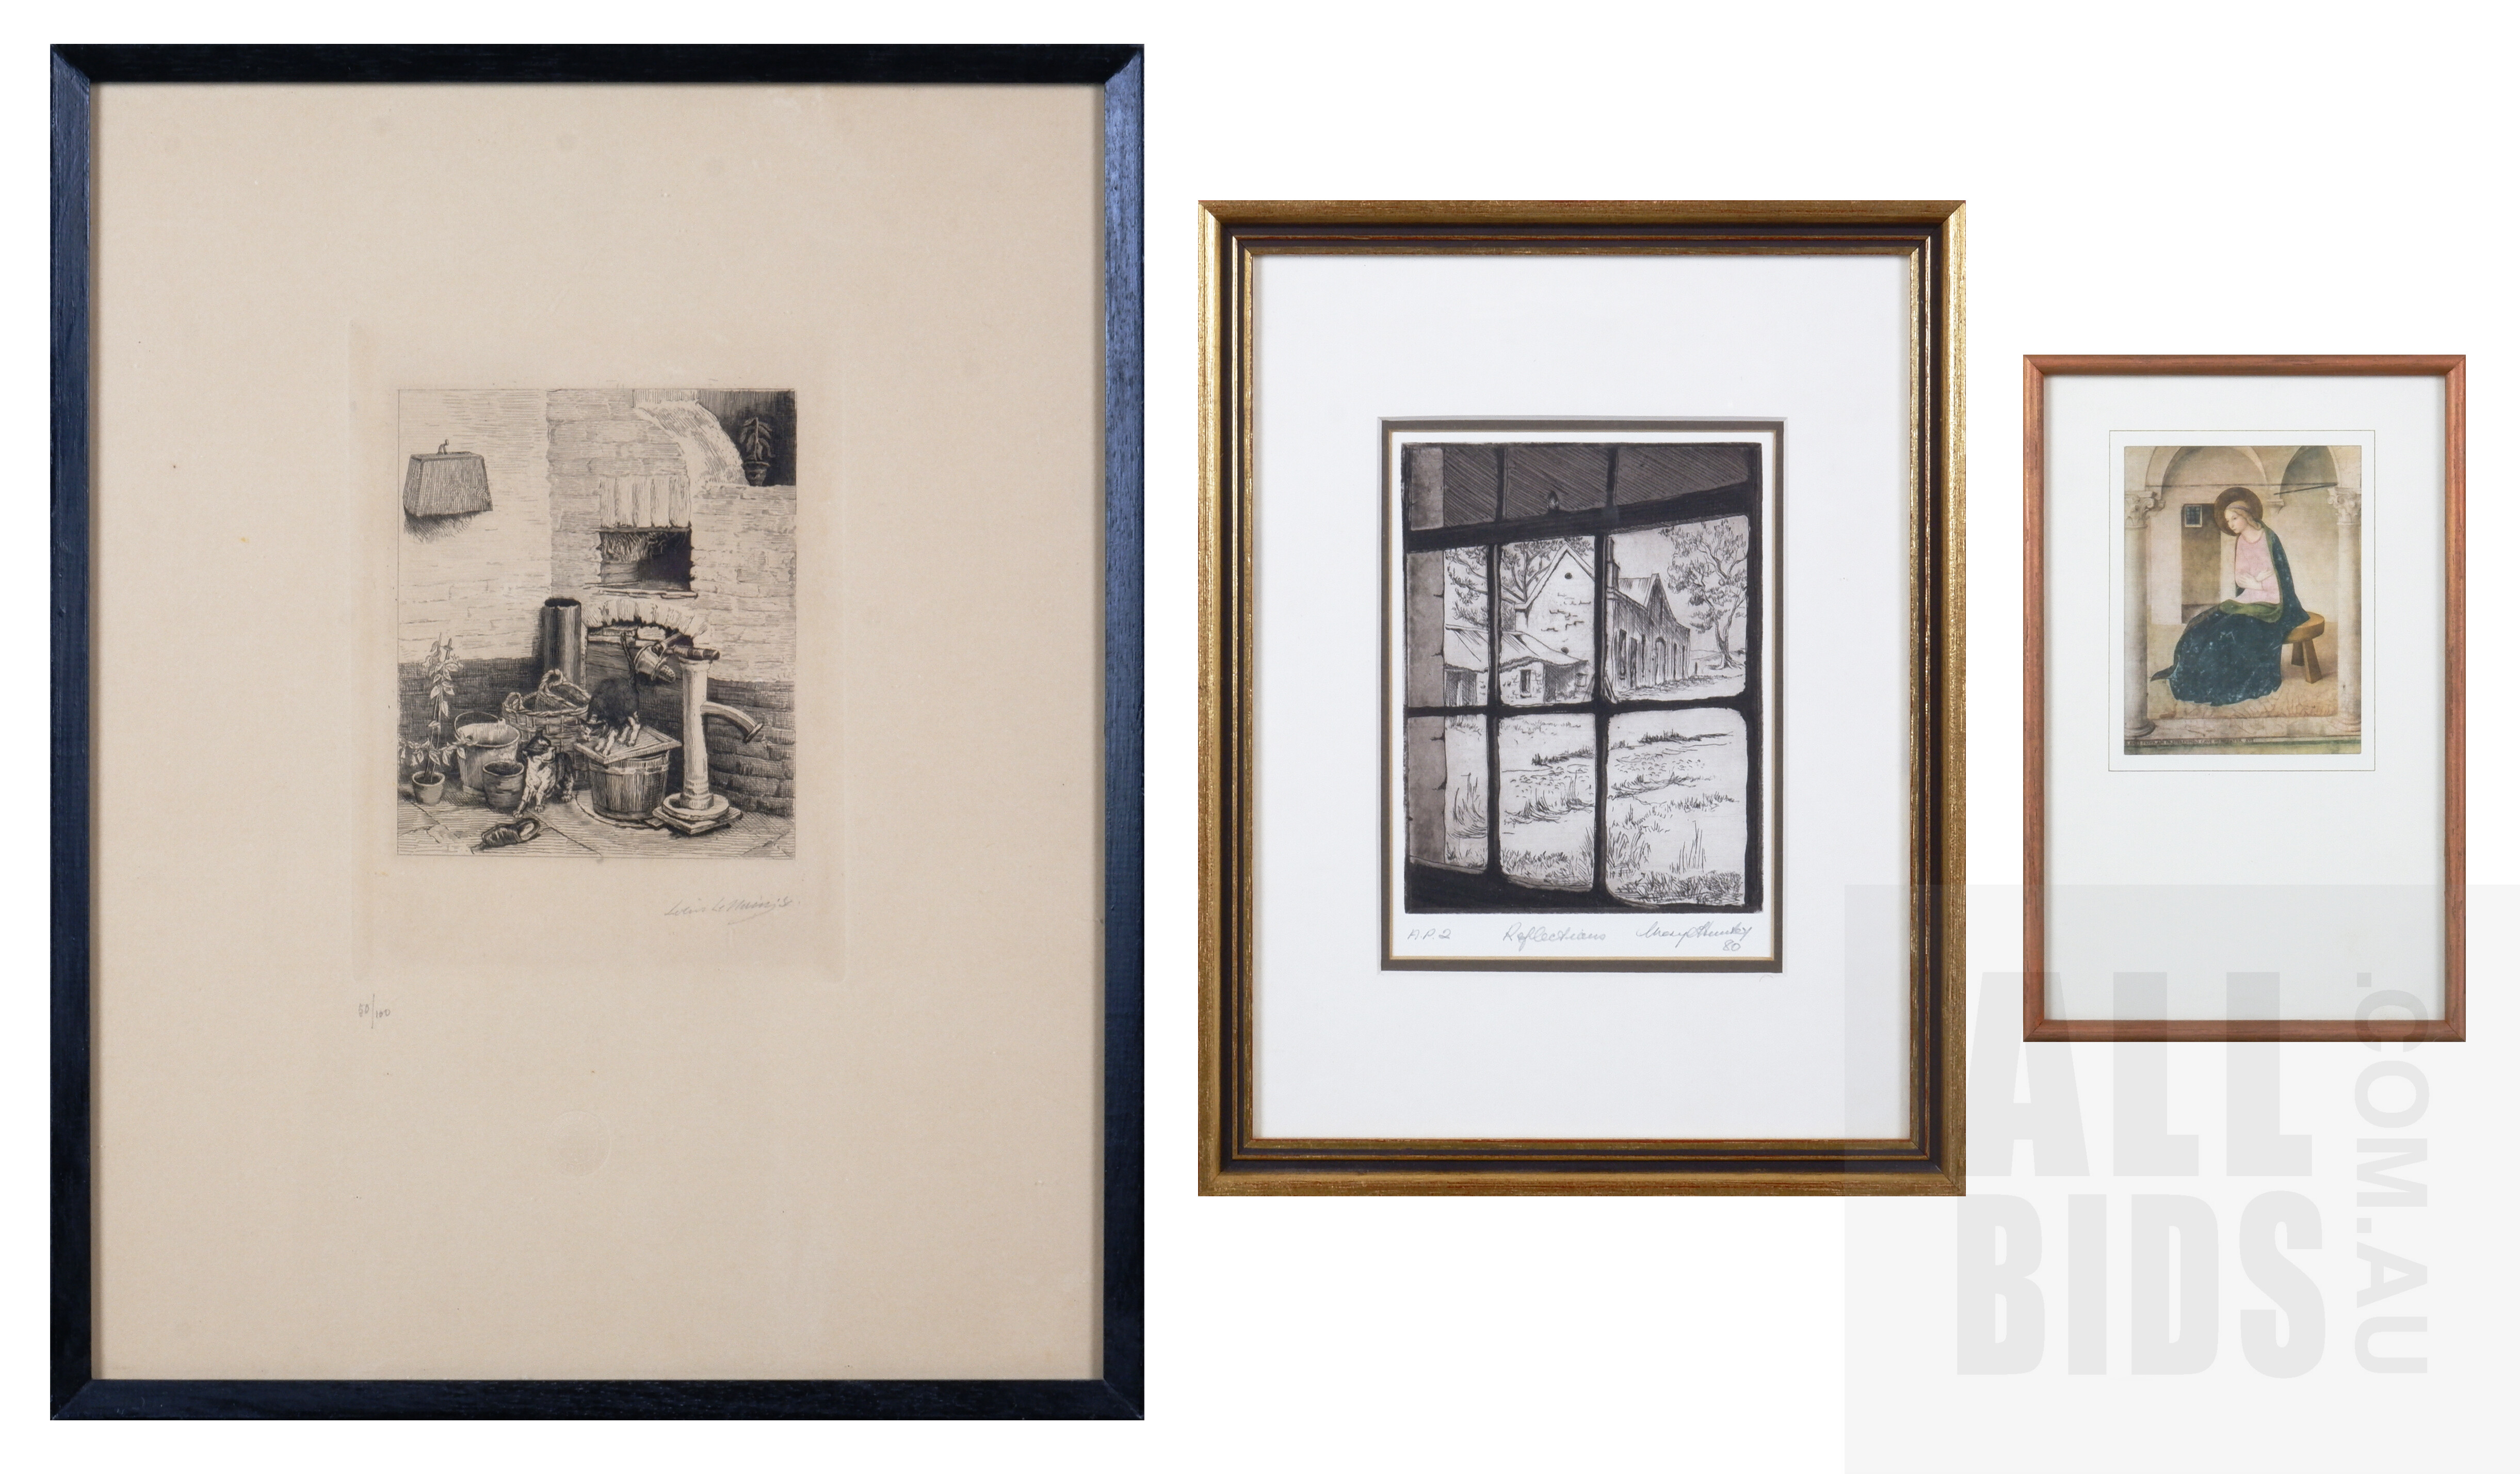 'After Louis le Nain, Etching, 13 x 11 cm (image size), Edition 50/100 together with Mary Hunter, Reflections 1980, Etching, 13 x 9.5 cm (AP) and a framed reproduction print of Fra Angelico, The Annunciation (3)'